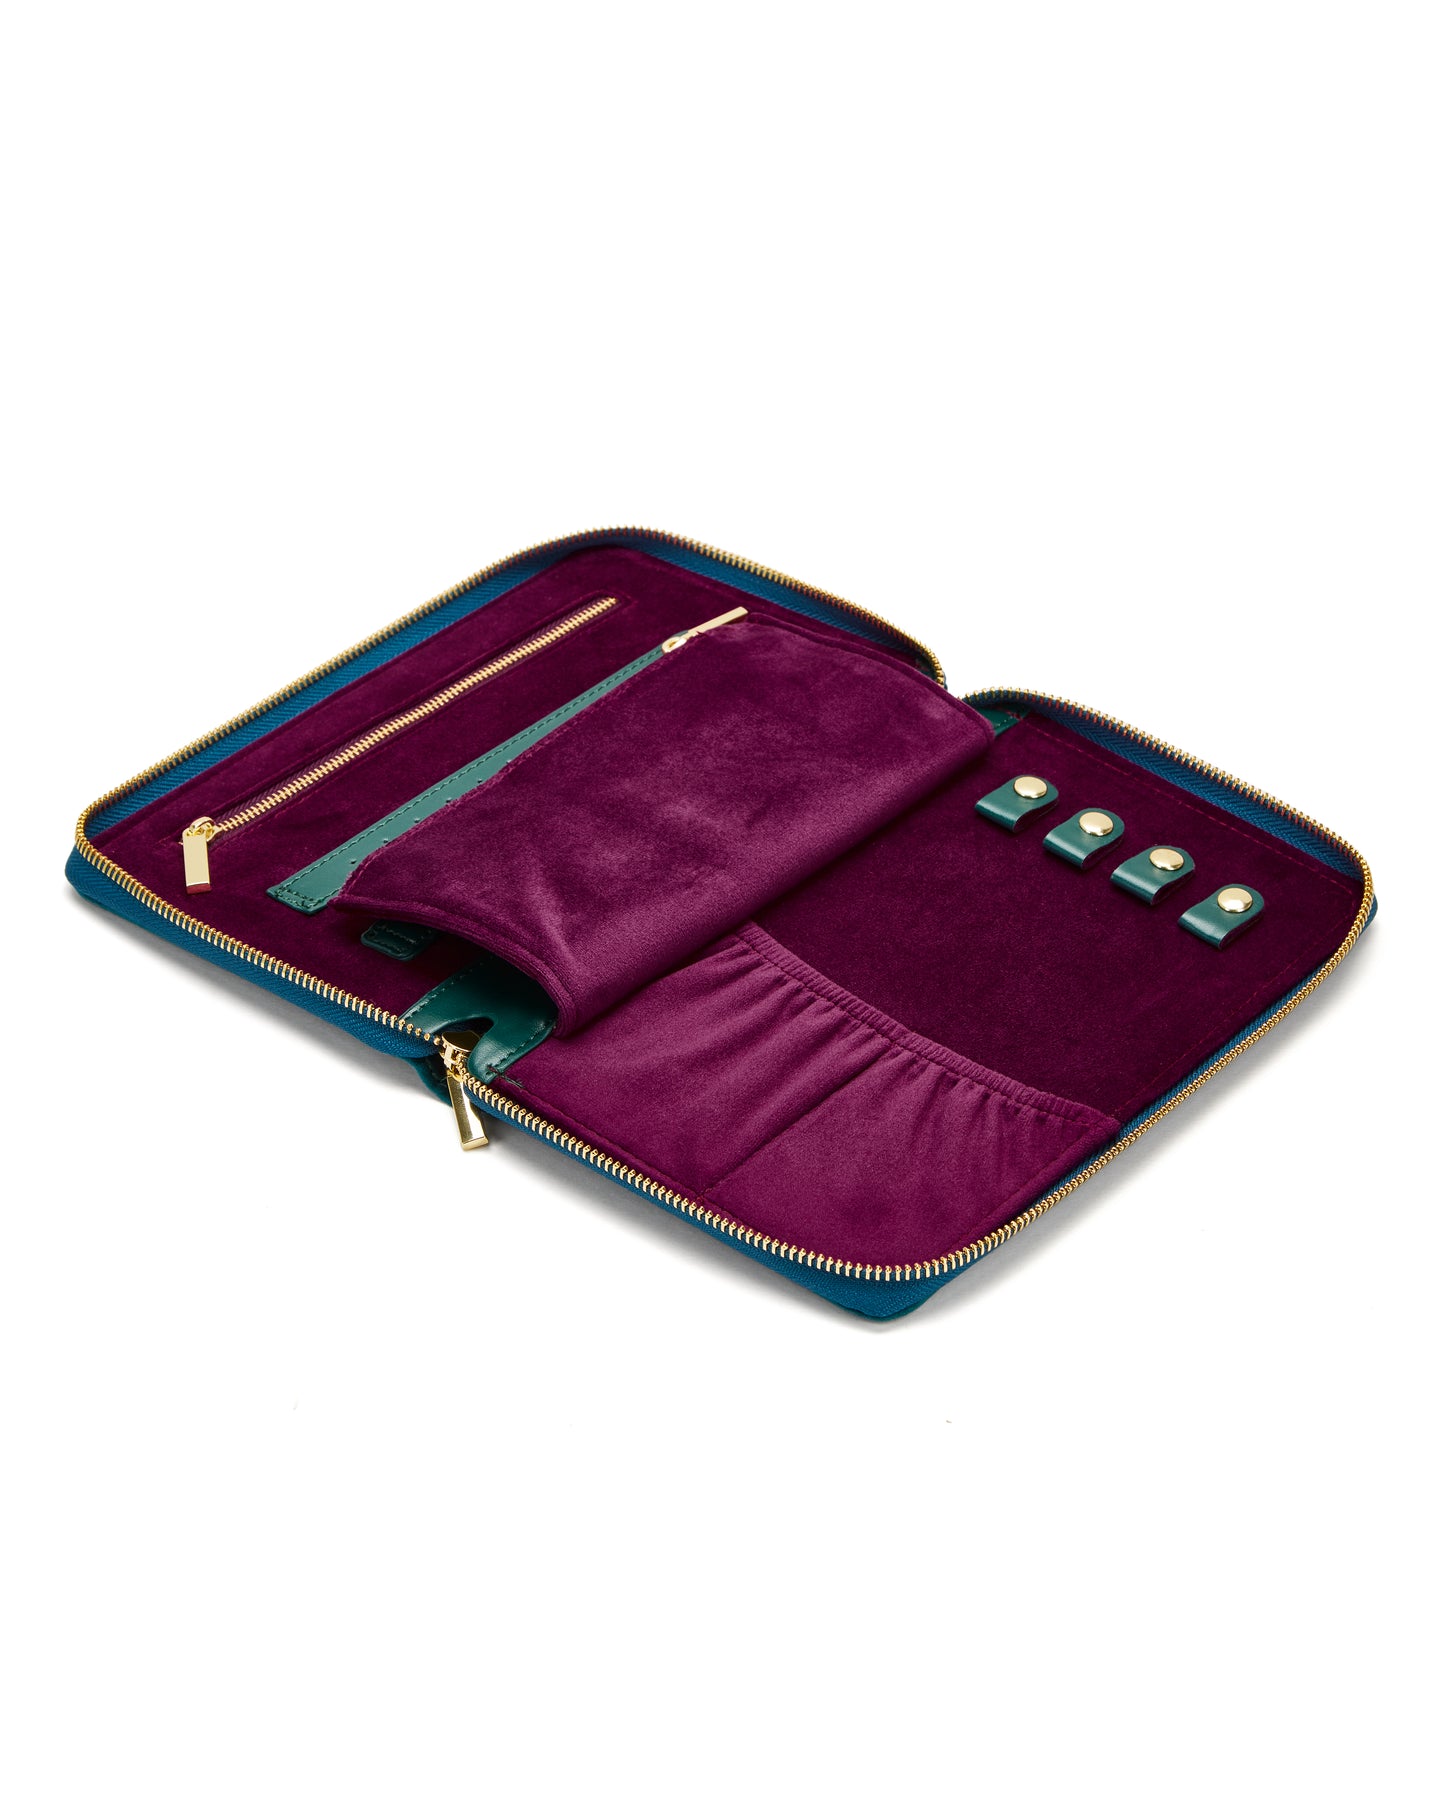 JEWELRY CLUTCH col. emerald-blackberry, directly orderable - 2 pieces